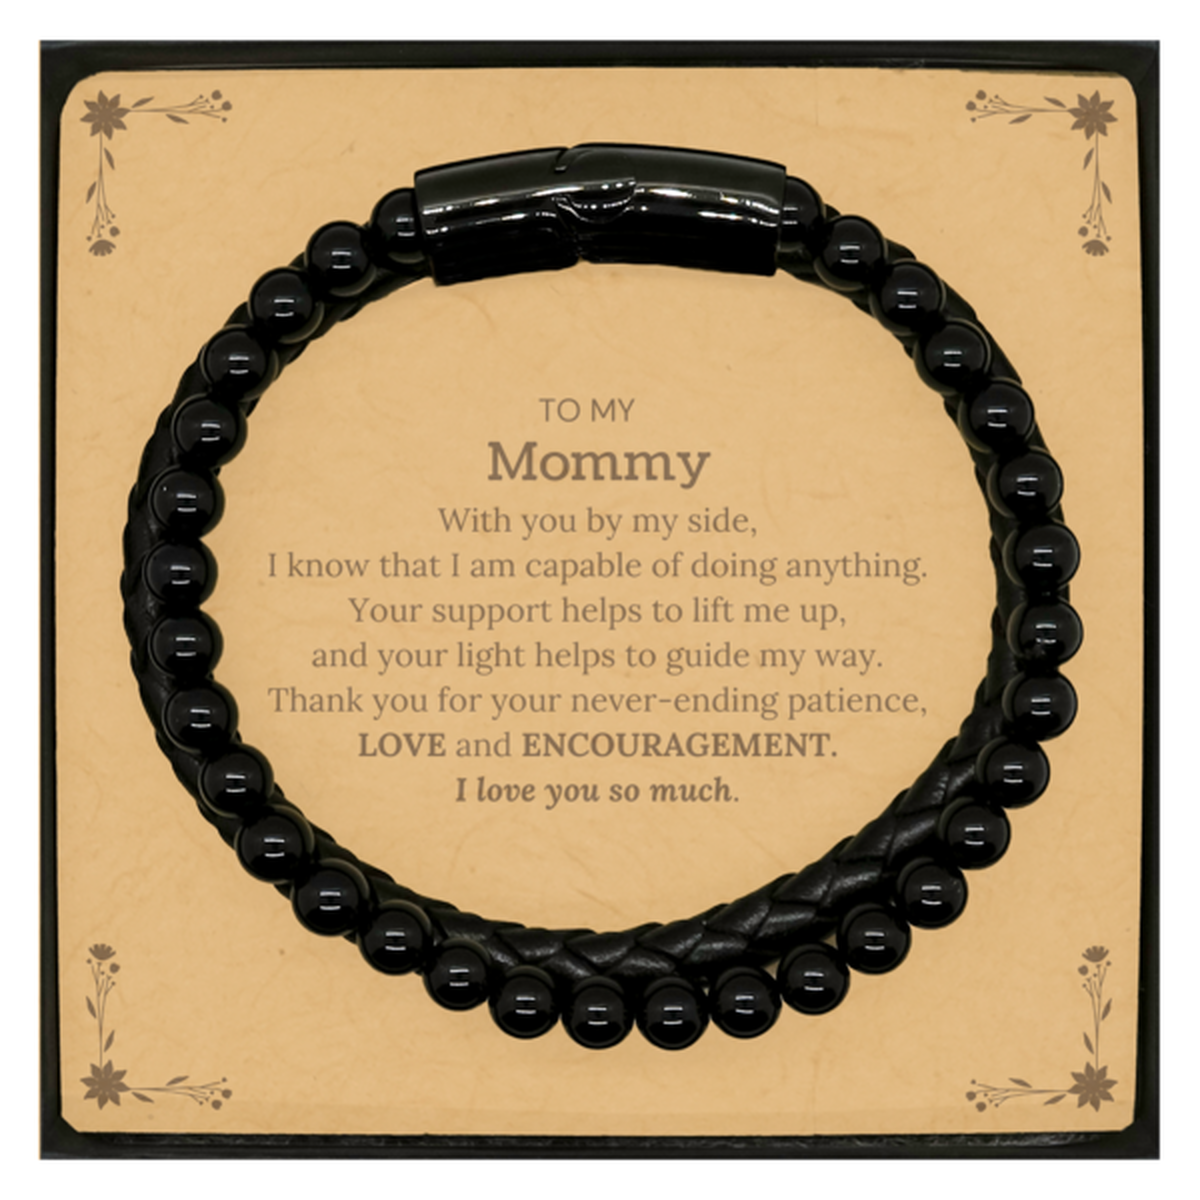 Appreciation Mommy Stone Leather Bracelets Gifts, To My Mommy Birthday Christmas Wedding Keepsake Gifts for Mommy With you by my side, I know that I am capable of doing anything. I love you so much